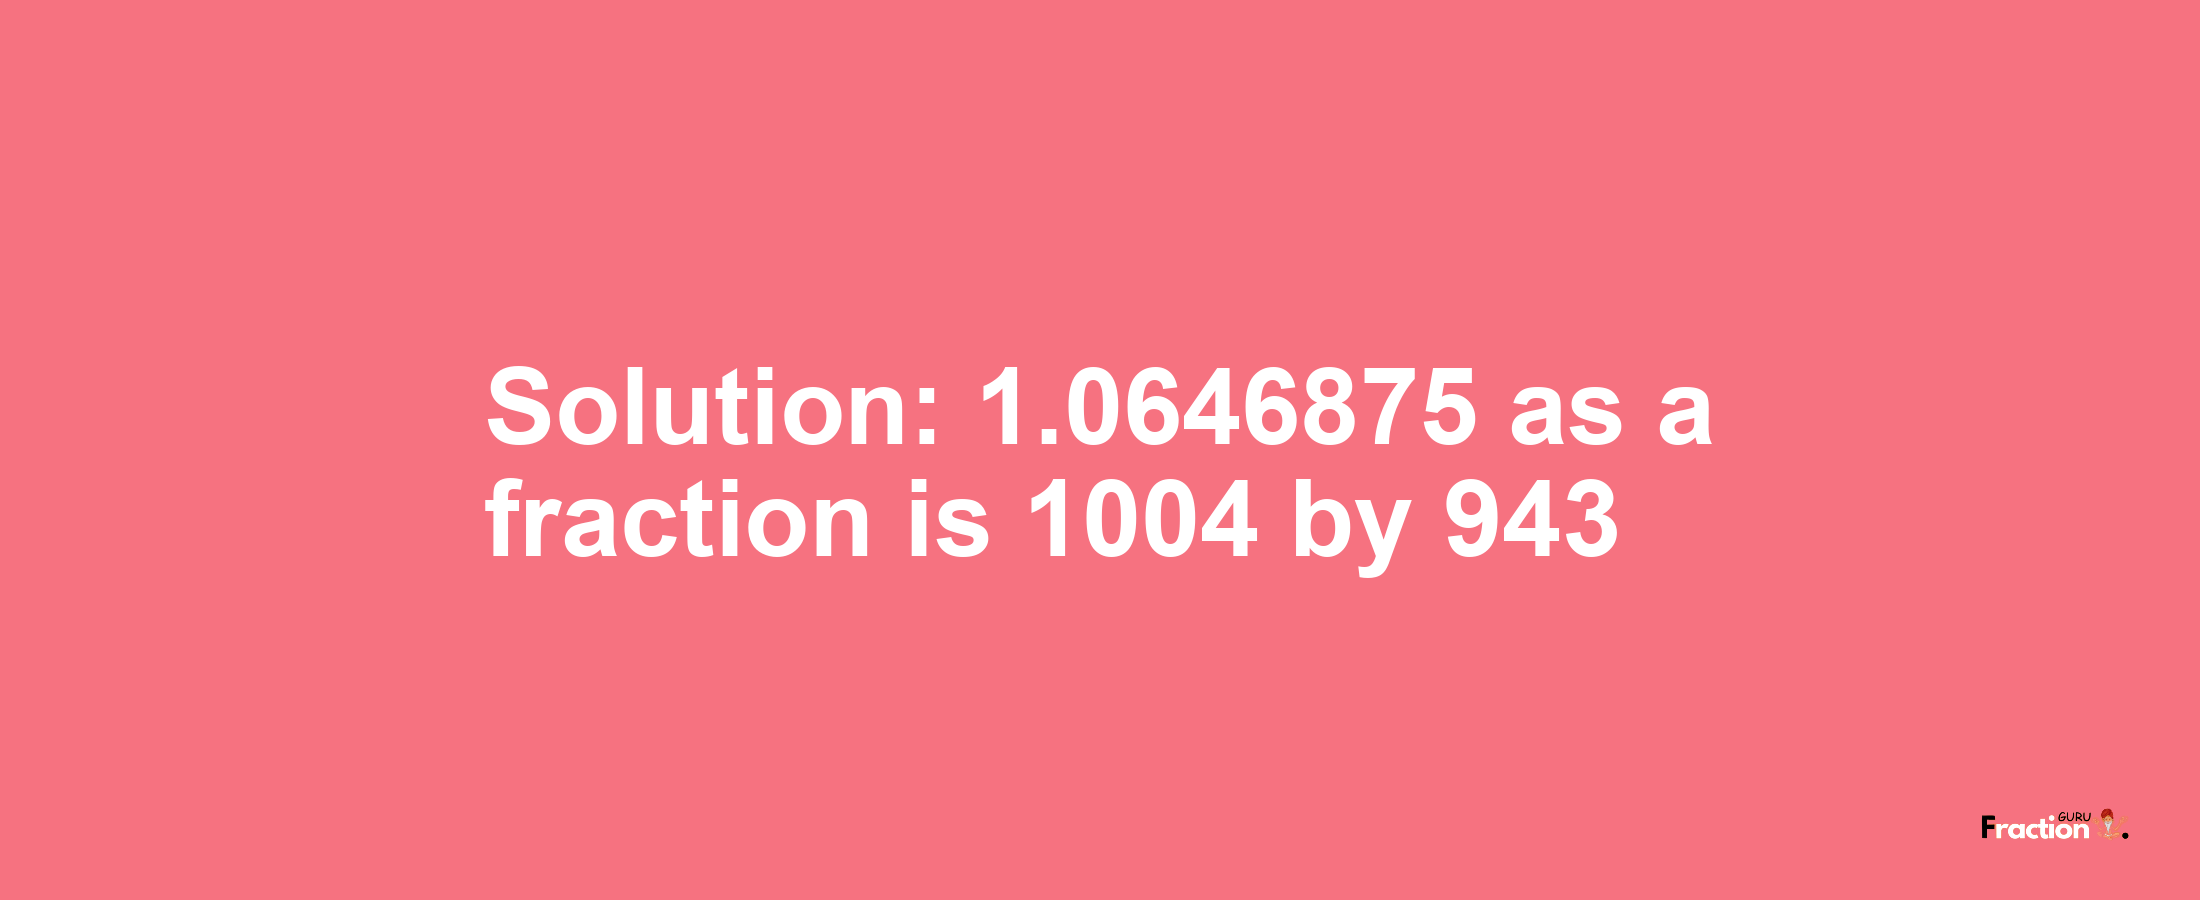 Solution:1.0646875 as a fraction is 1004/943